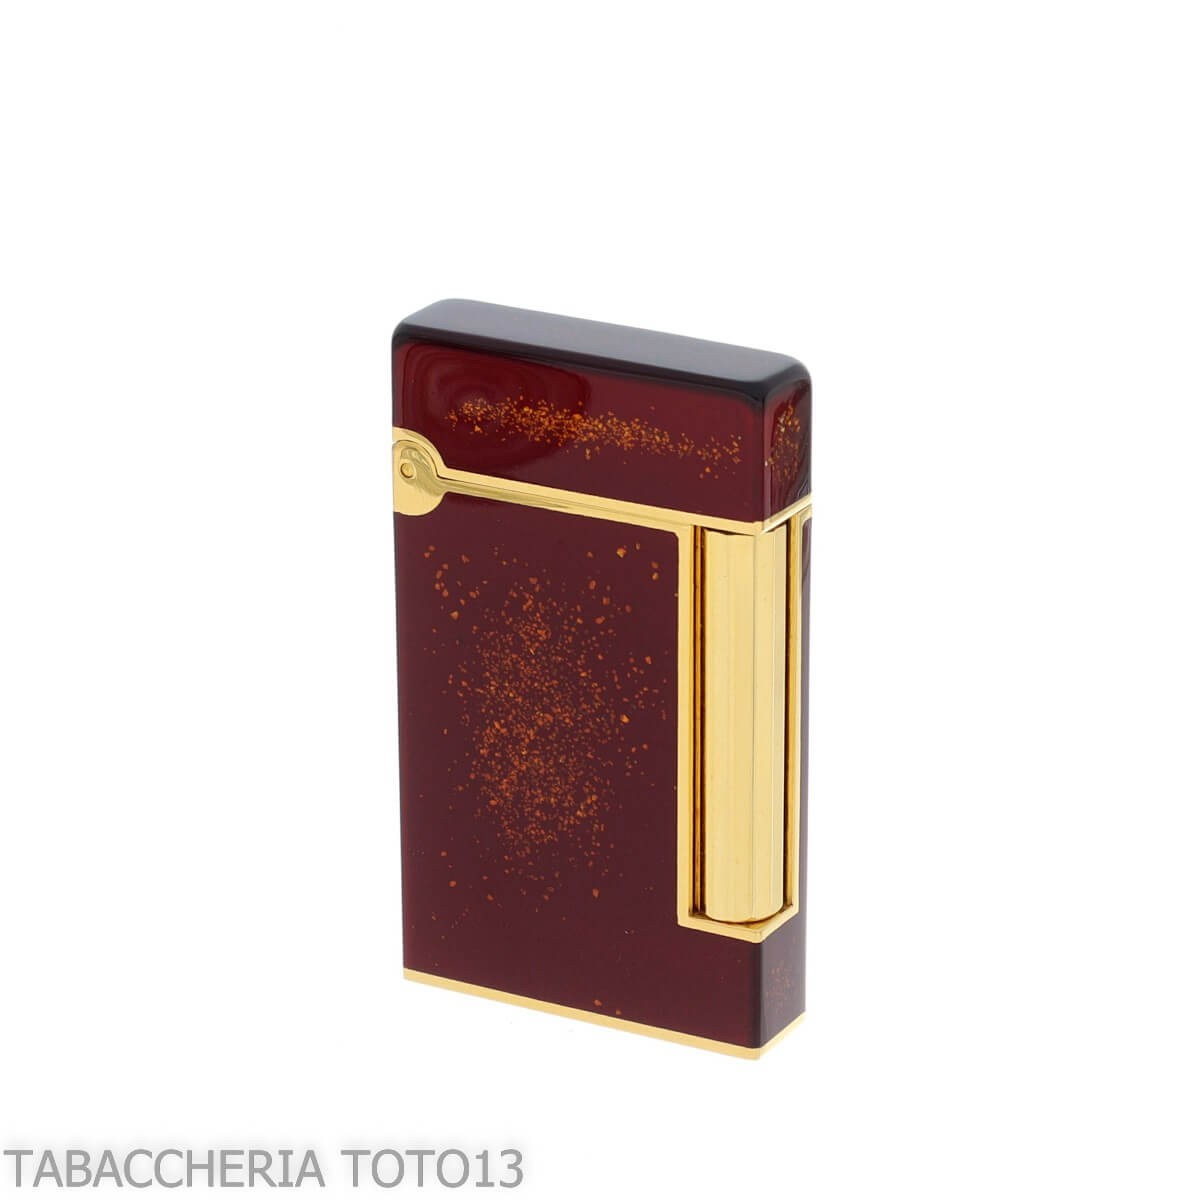 S.T. Dupont line D lady lacquer of China and gold dust lighter.